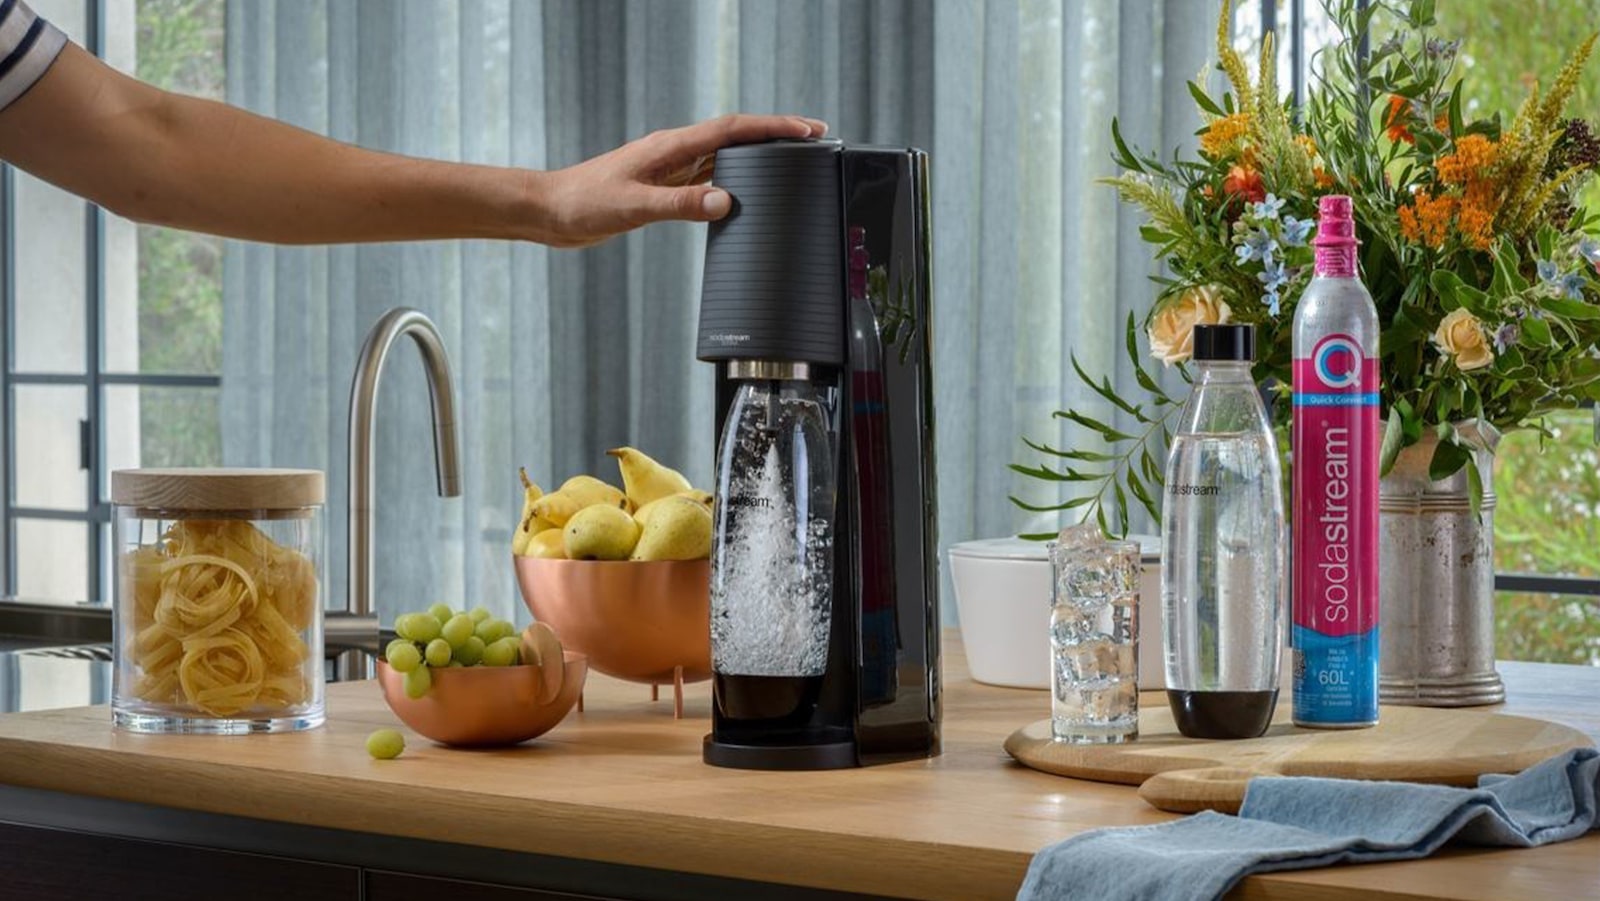 SodaStream Terra sparkling water maker lets you control your fizz